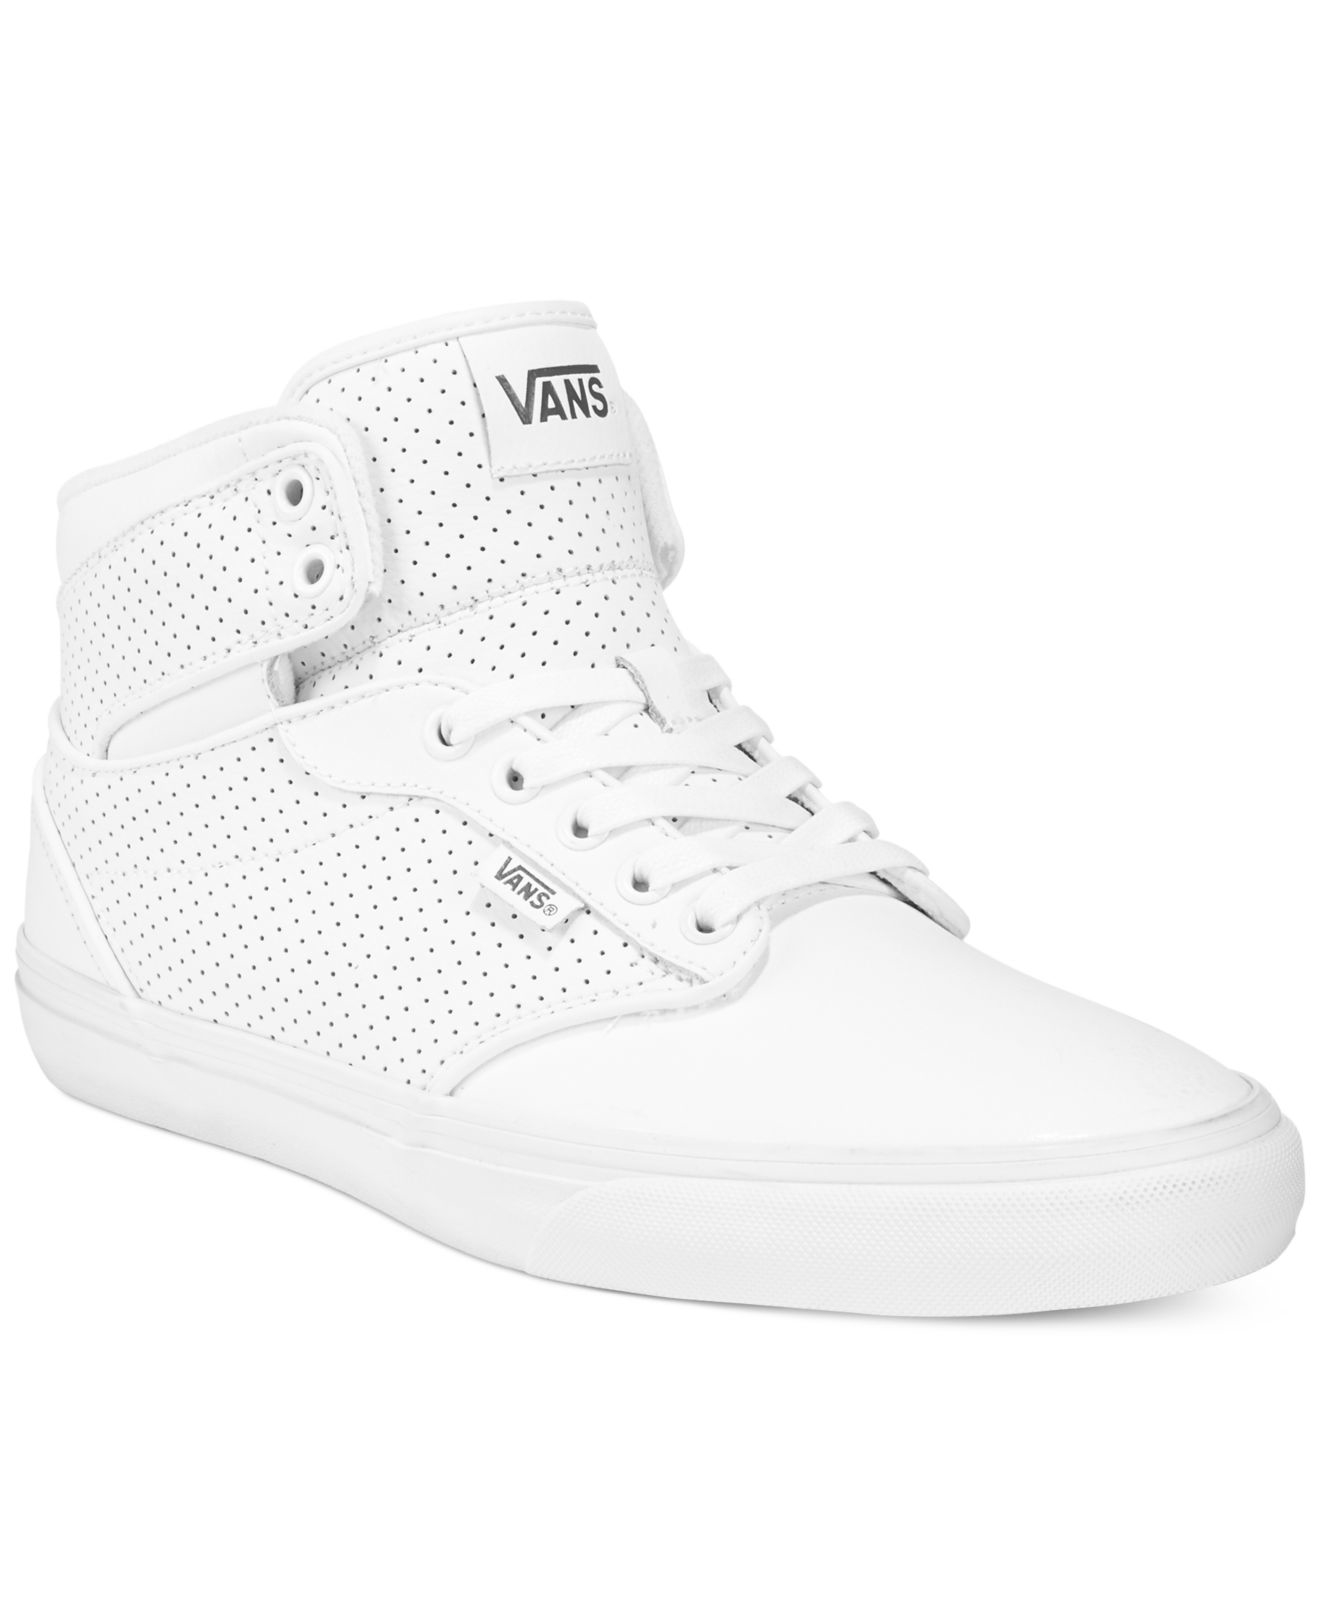 Vans Atwood White Leather Deals, 57% OFF | lagence.tv بخاخ فيوجن